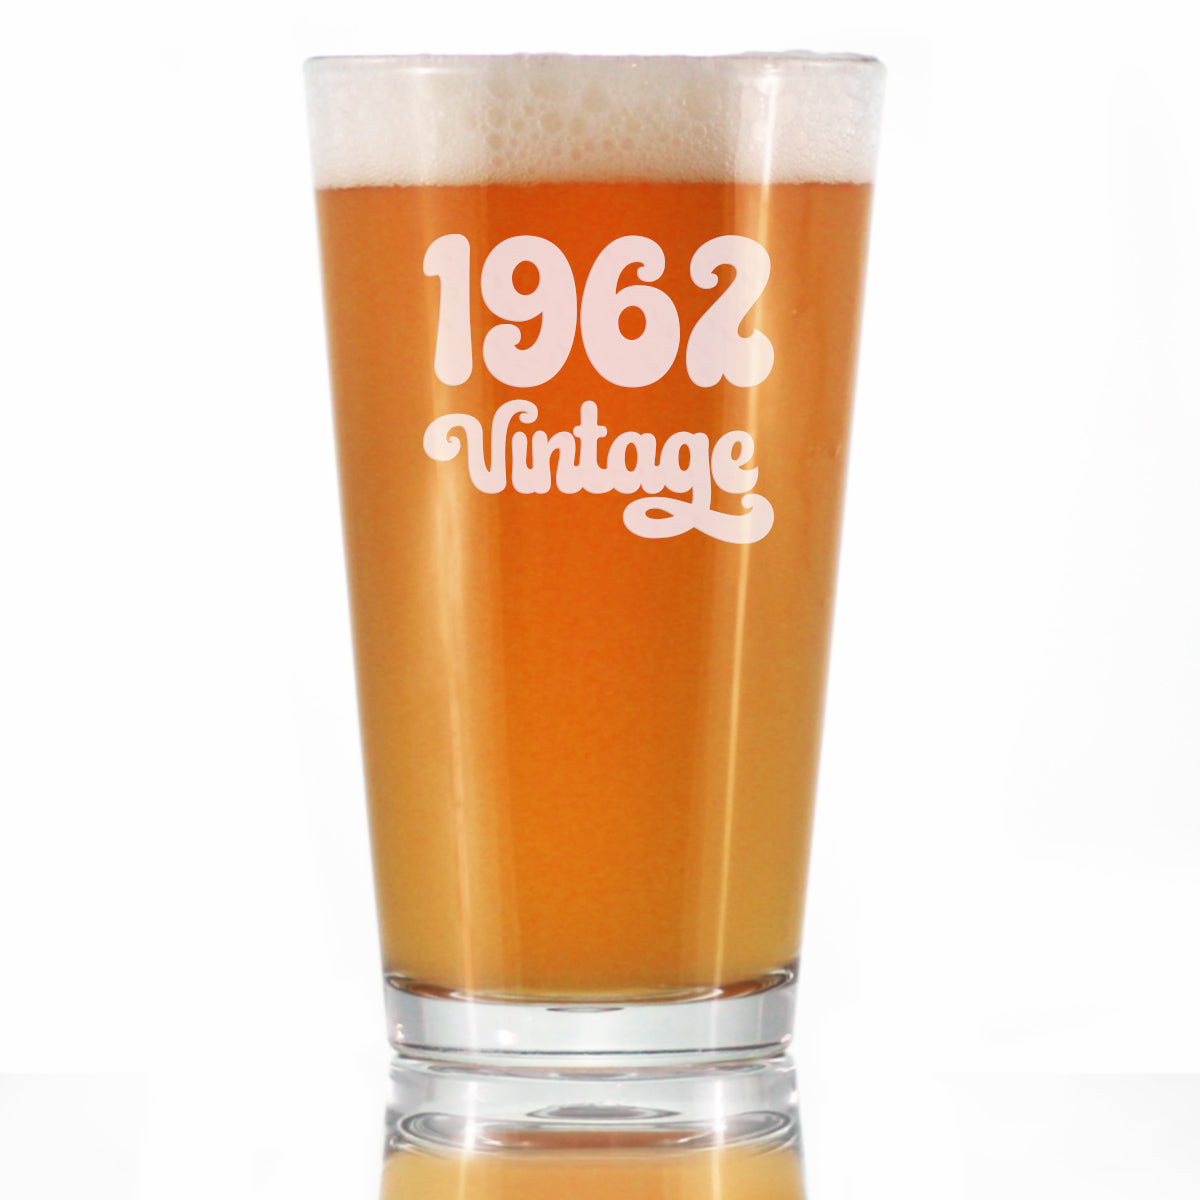 Vintage 1962 - Pint Glass for Beer - 62nd Birthday Gifts for Men or Women Turning 62 - Fun Bday Party Decor - 16 oz